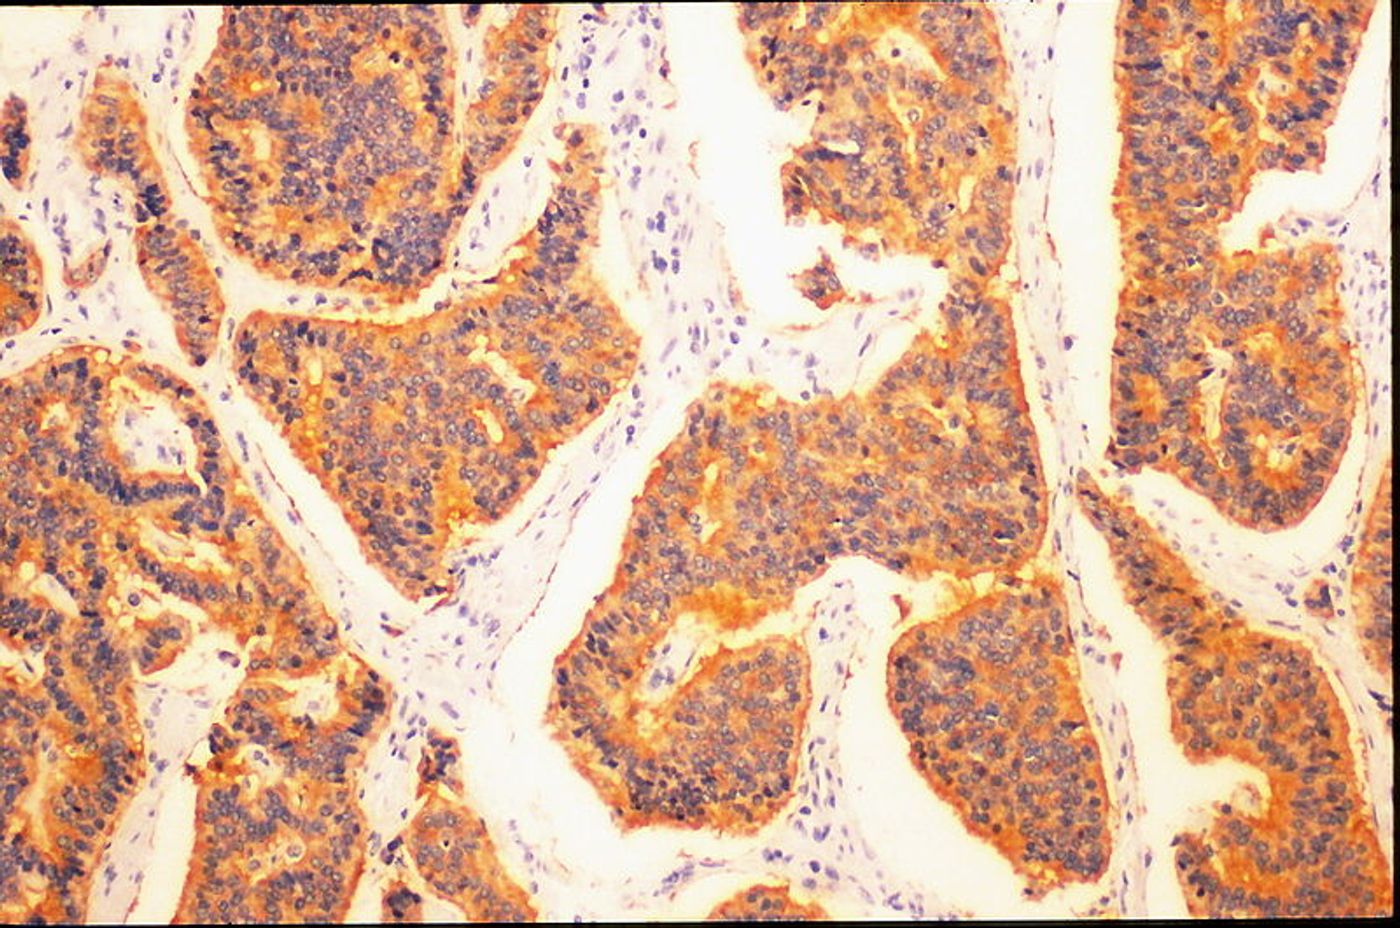 Histopathology of small cell lung carcinoma. Credit: Yale Rosen